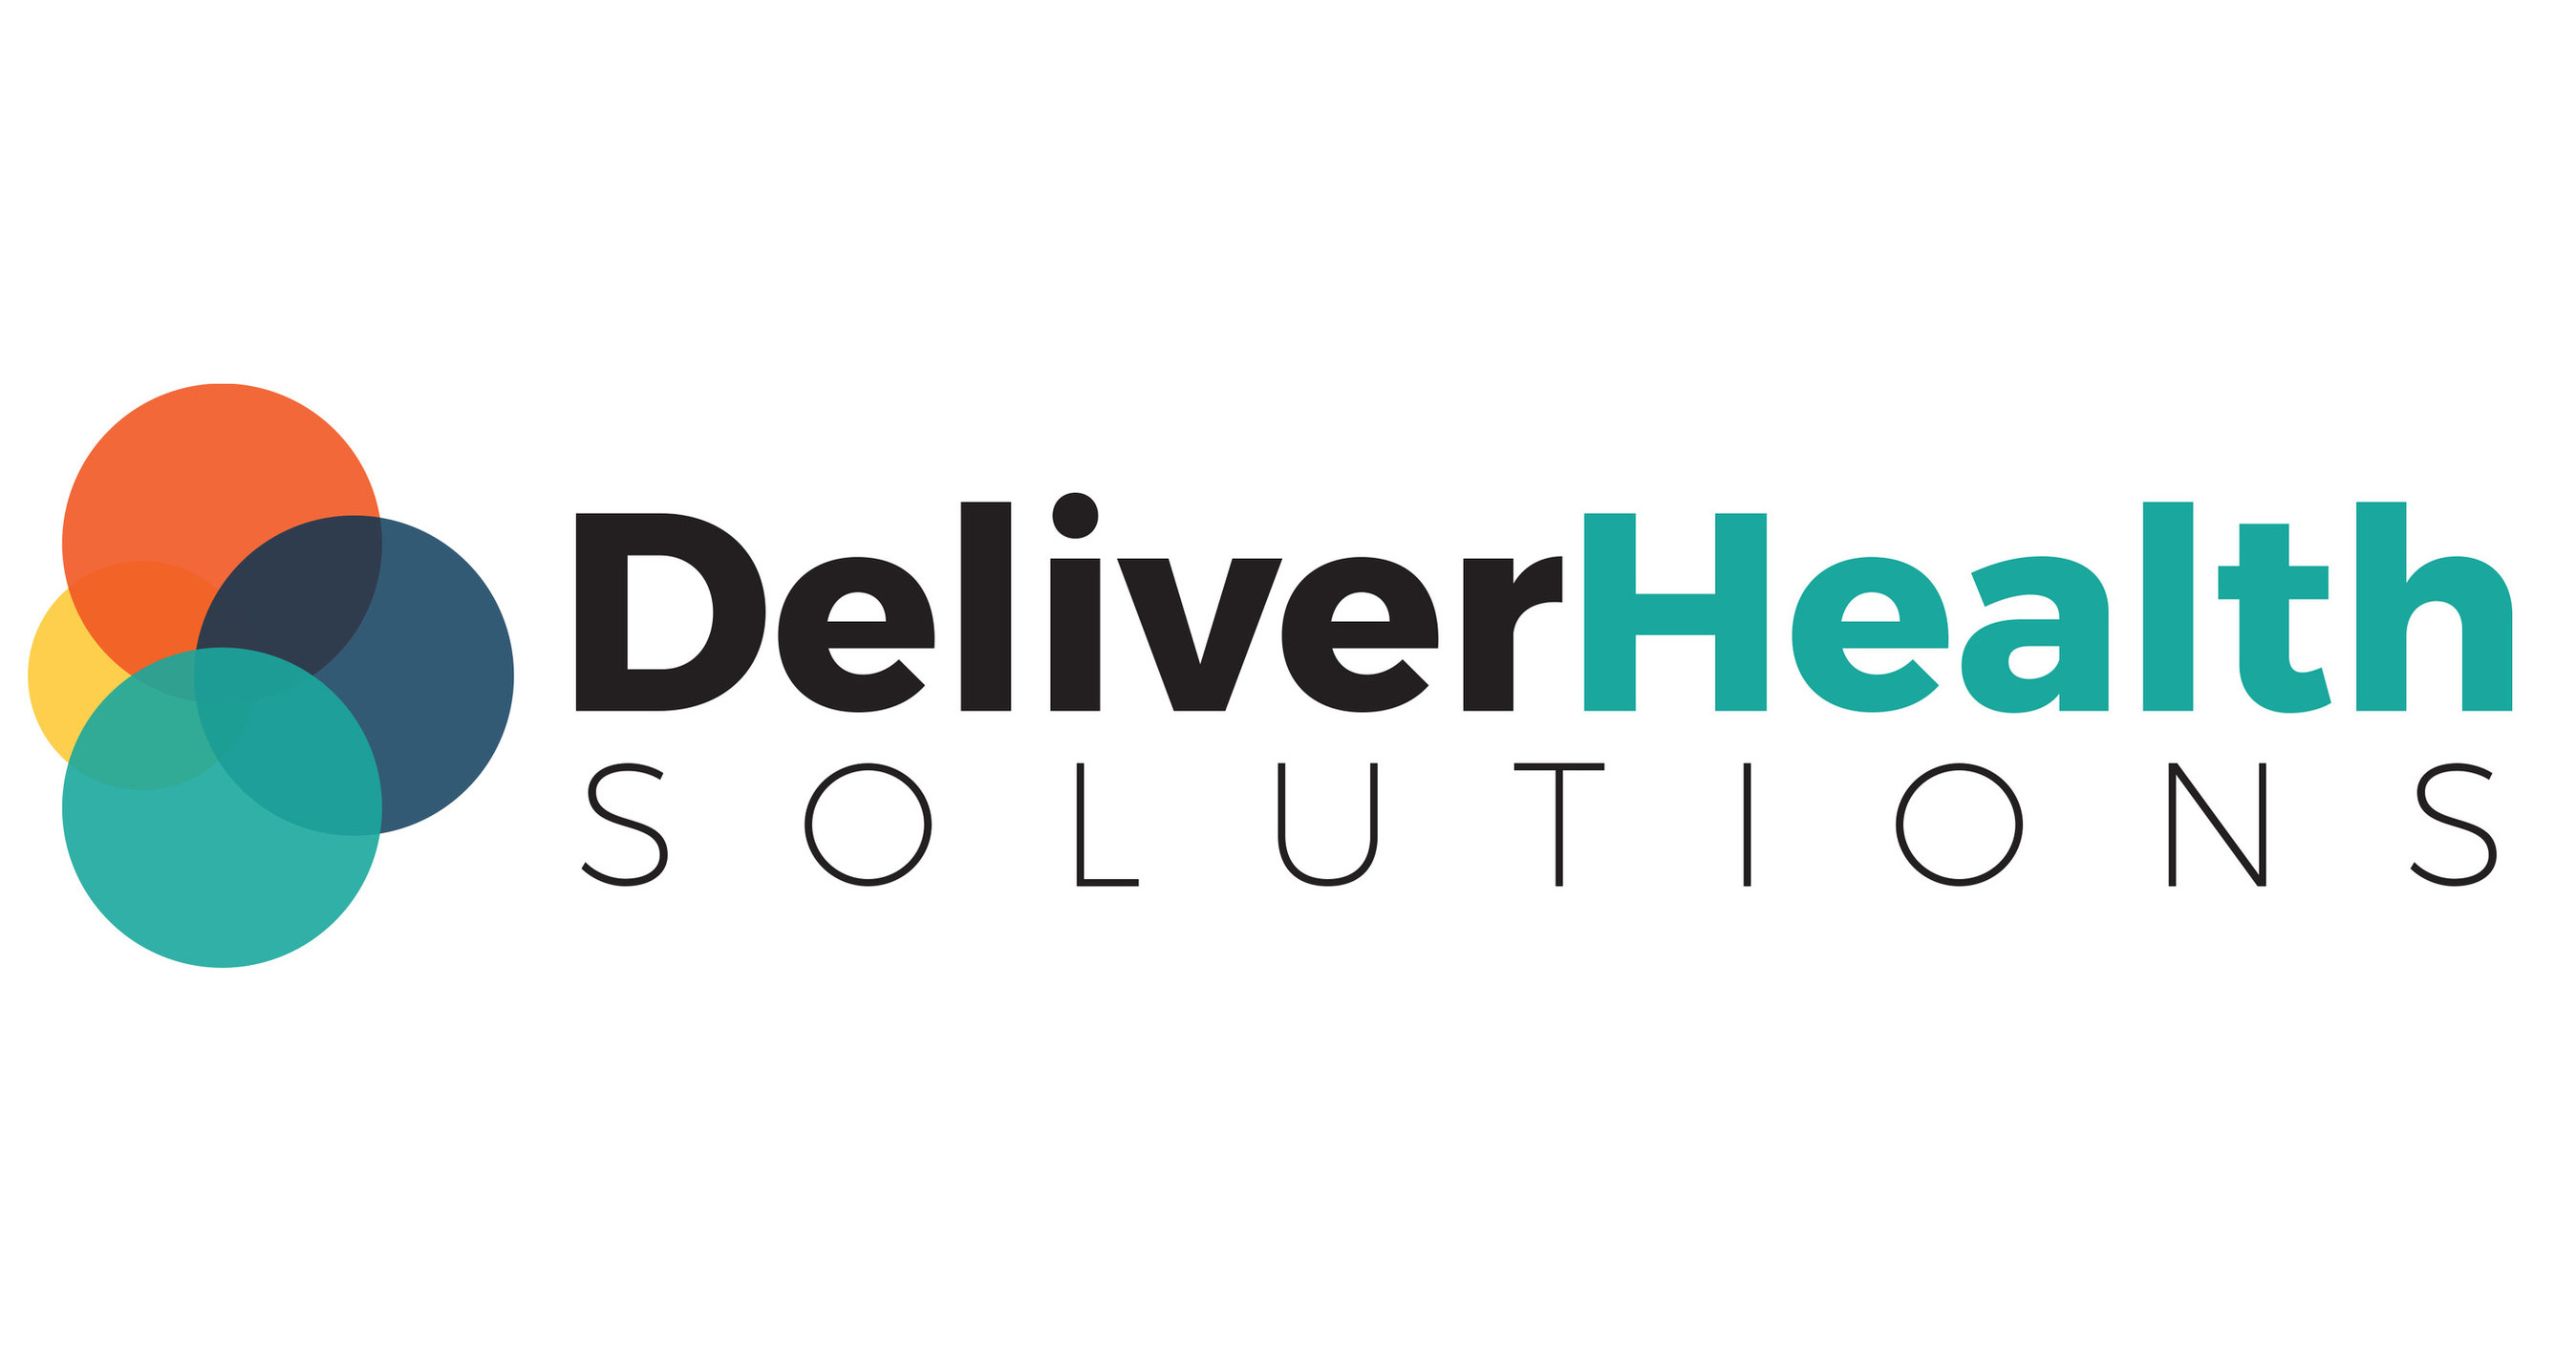 Deliver health solutions nuance how much is health insurance at cvs